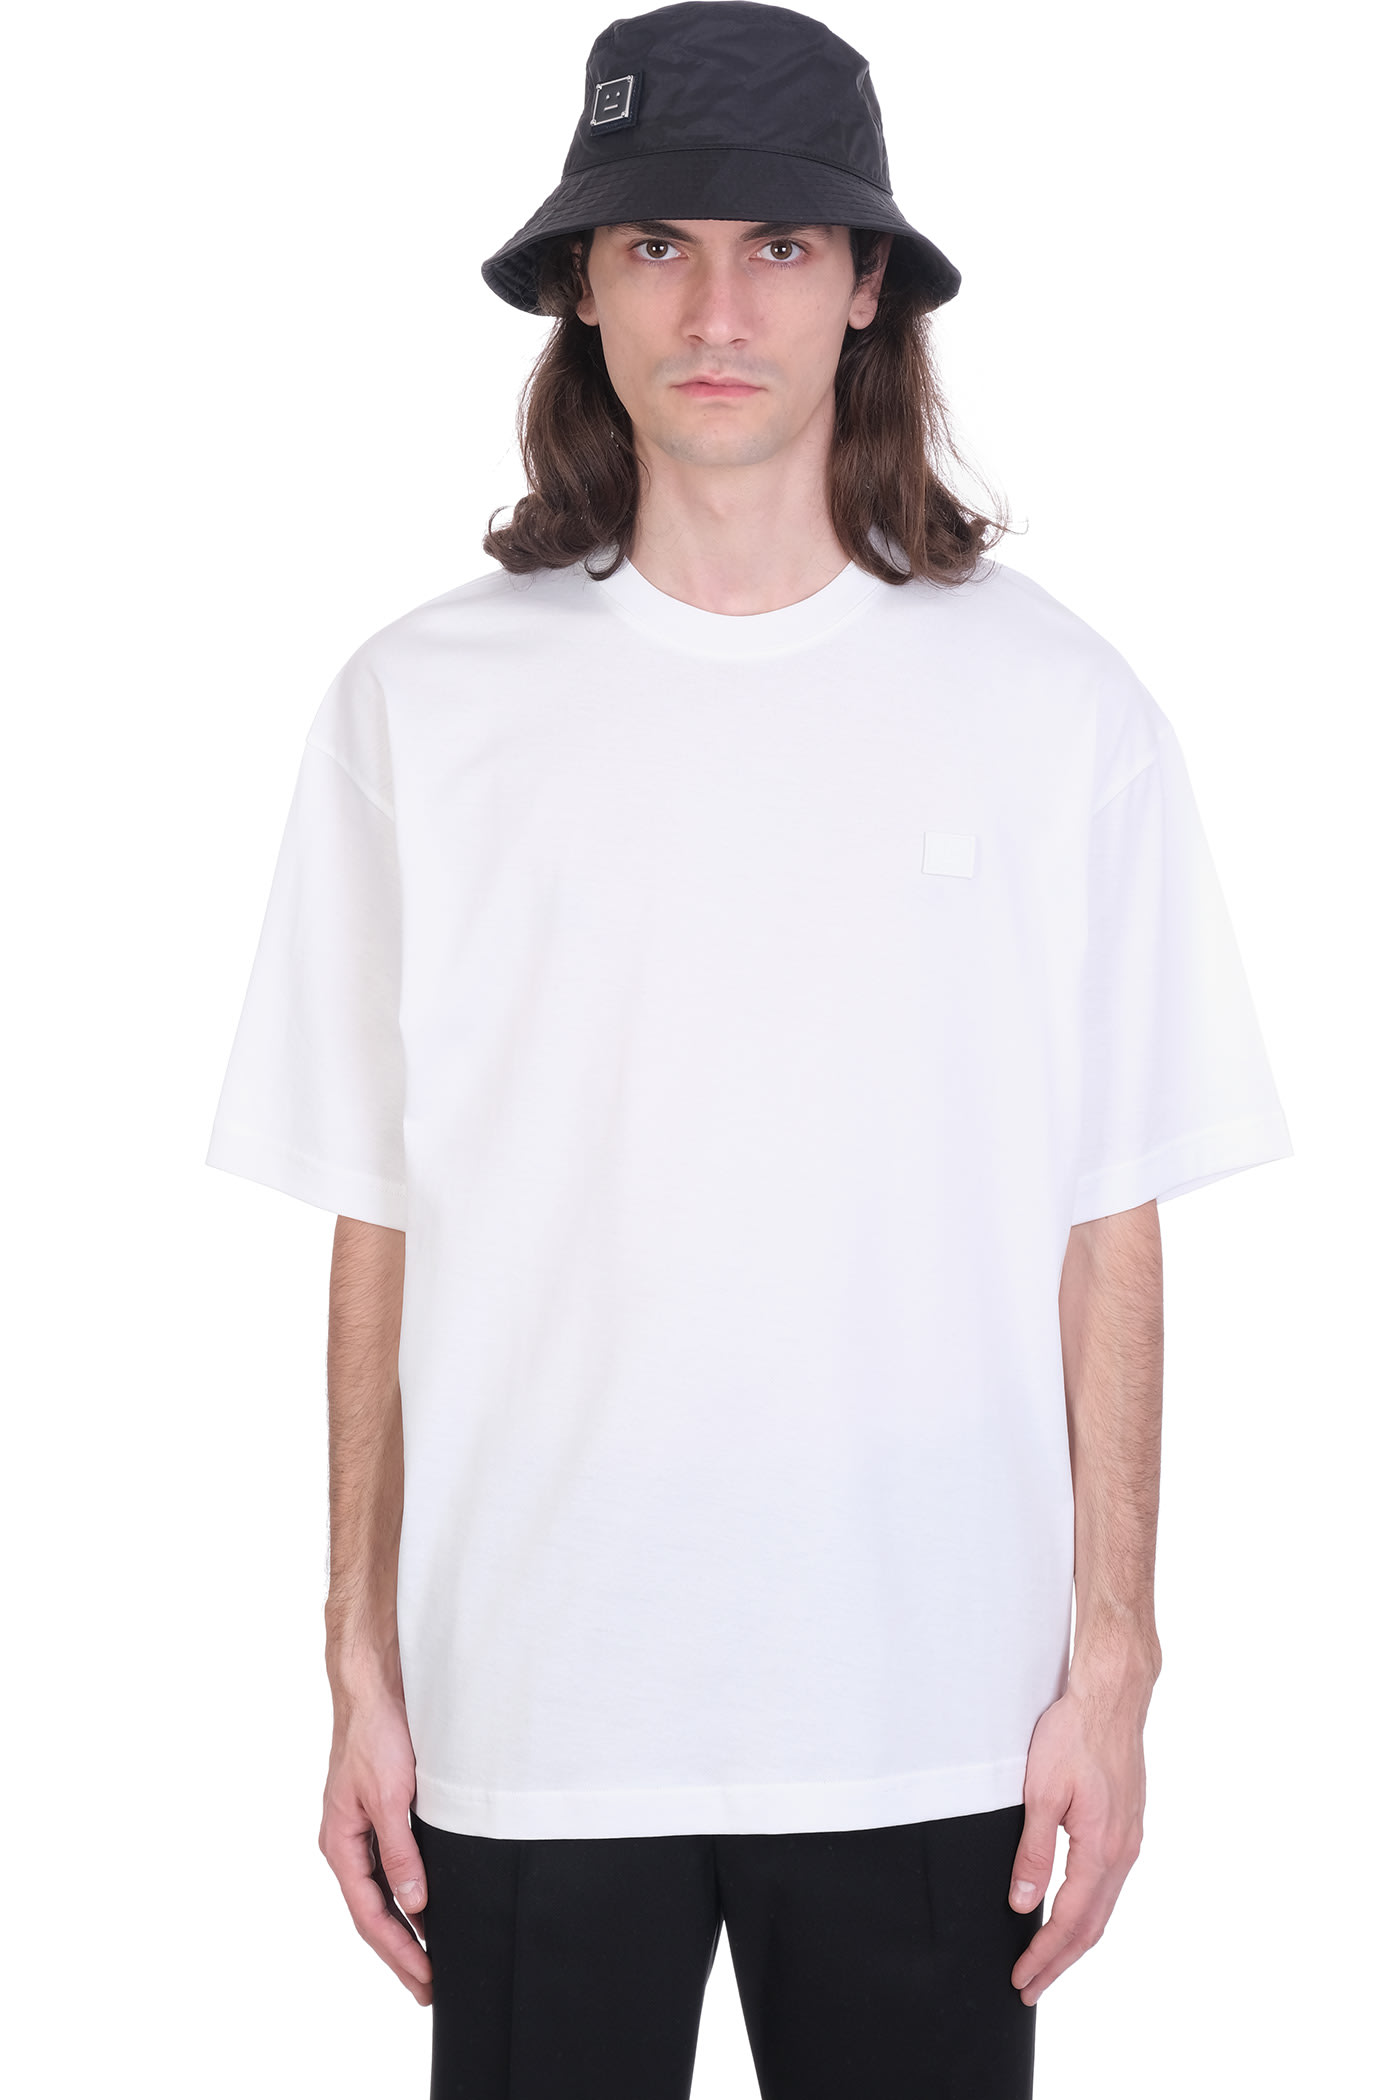 ACNE STUDIOS EXFORD FACE T-SHIRT IN WHITE COTTON,CL0085183